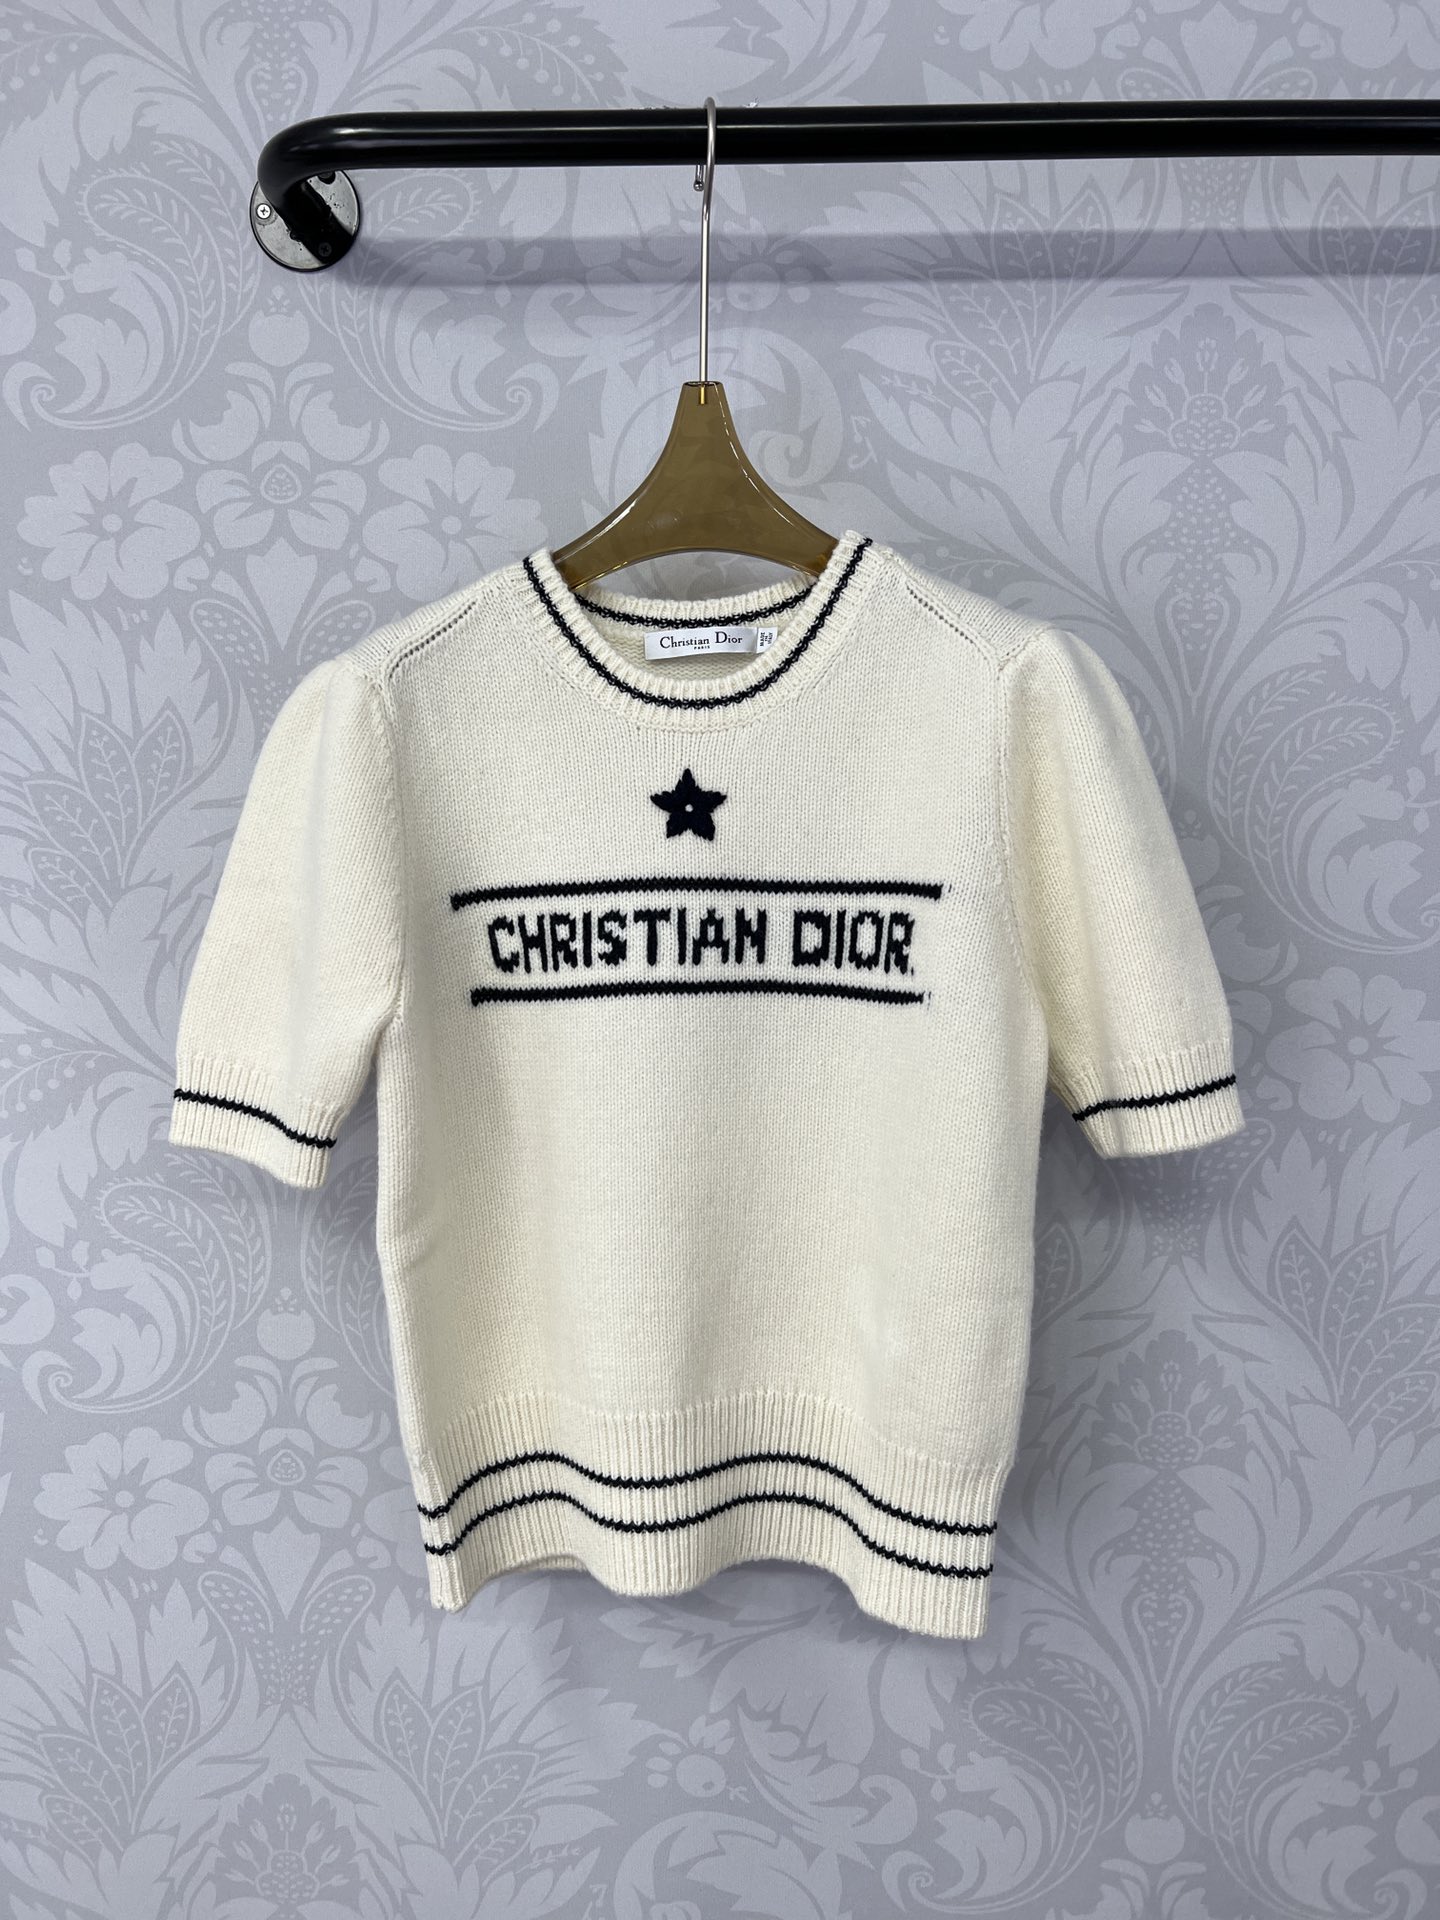 Dior Clothing Shirts & Blouses T-Shirt Beige White Embroidery Cashmere Knitting Wool Fashion Short Sleeve